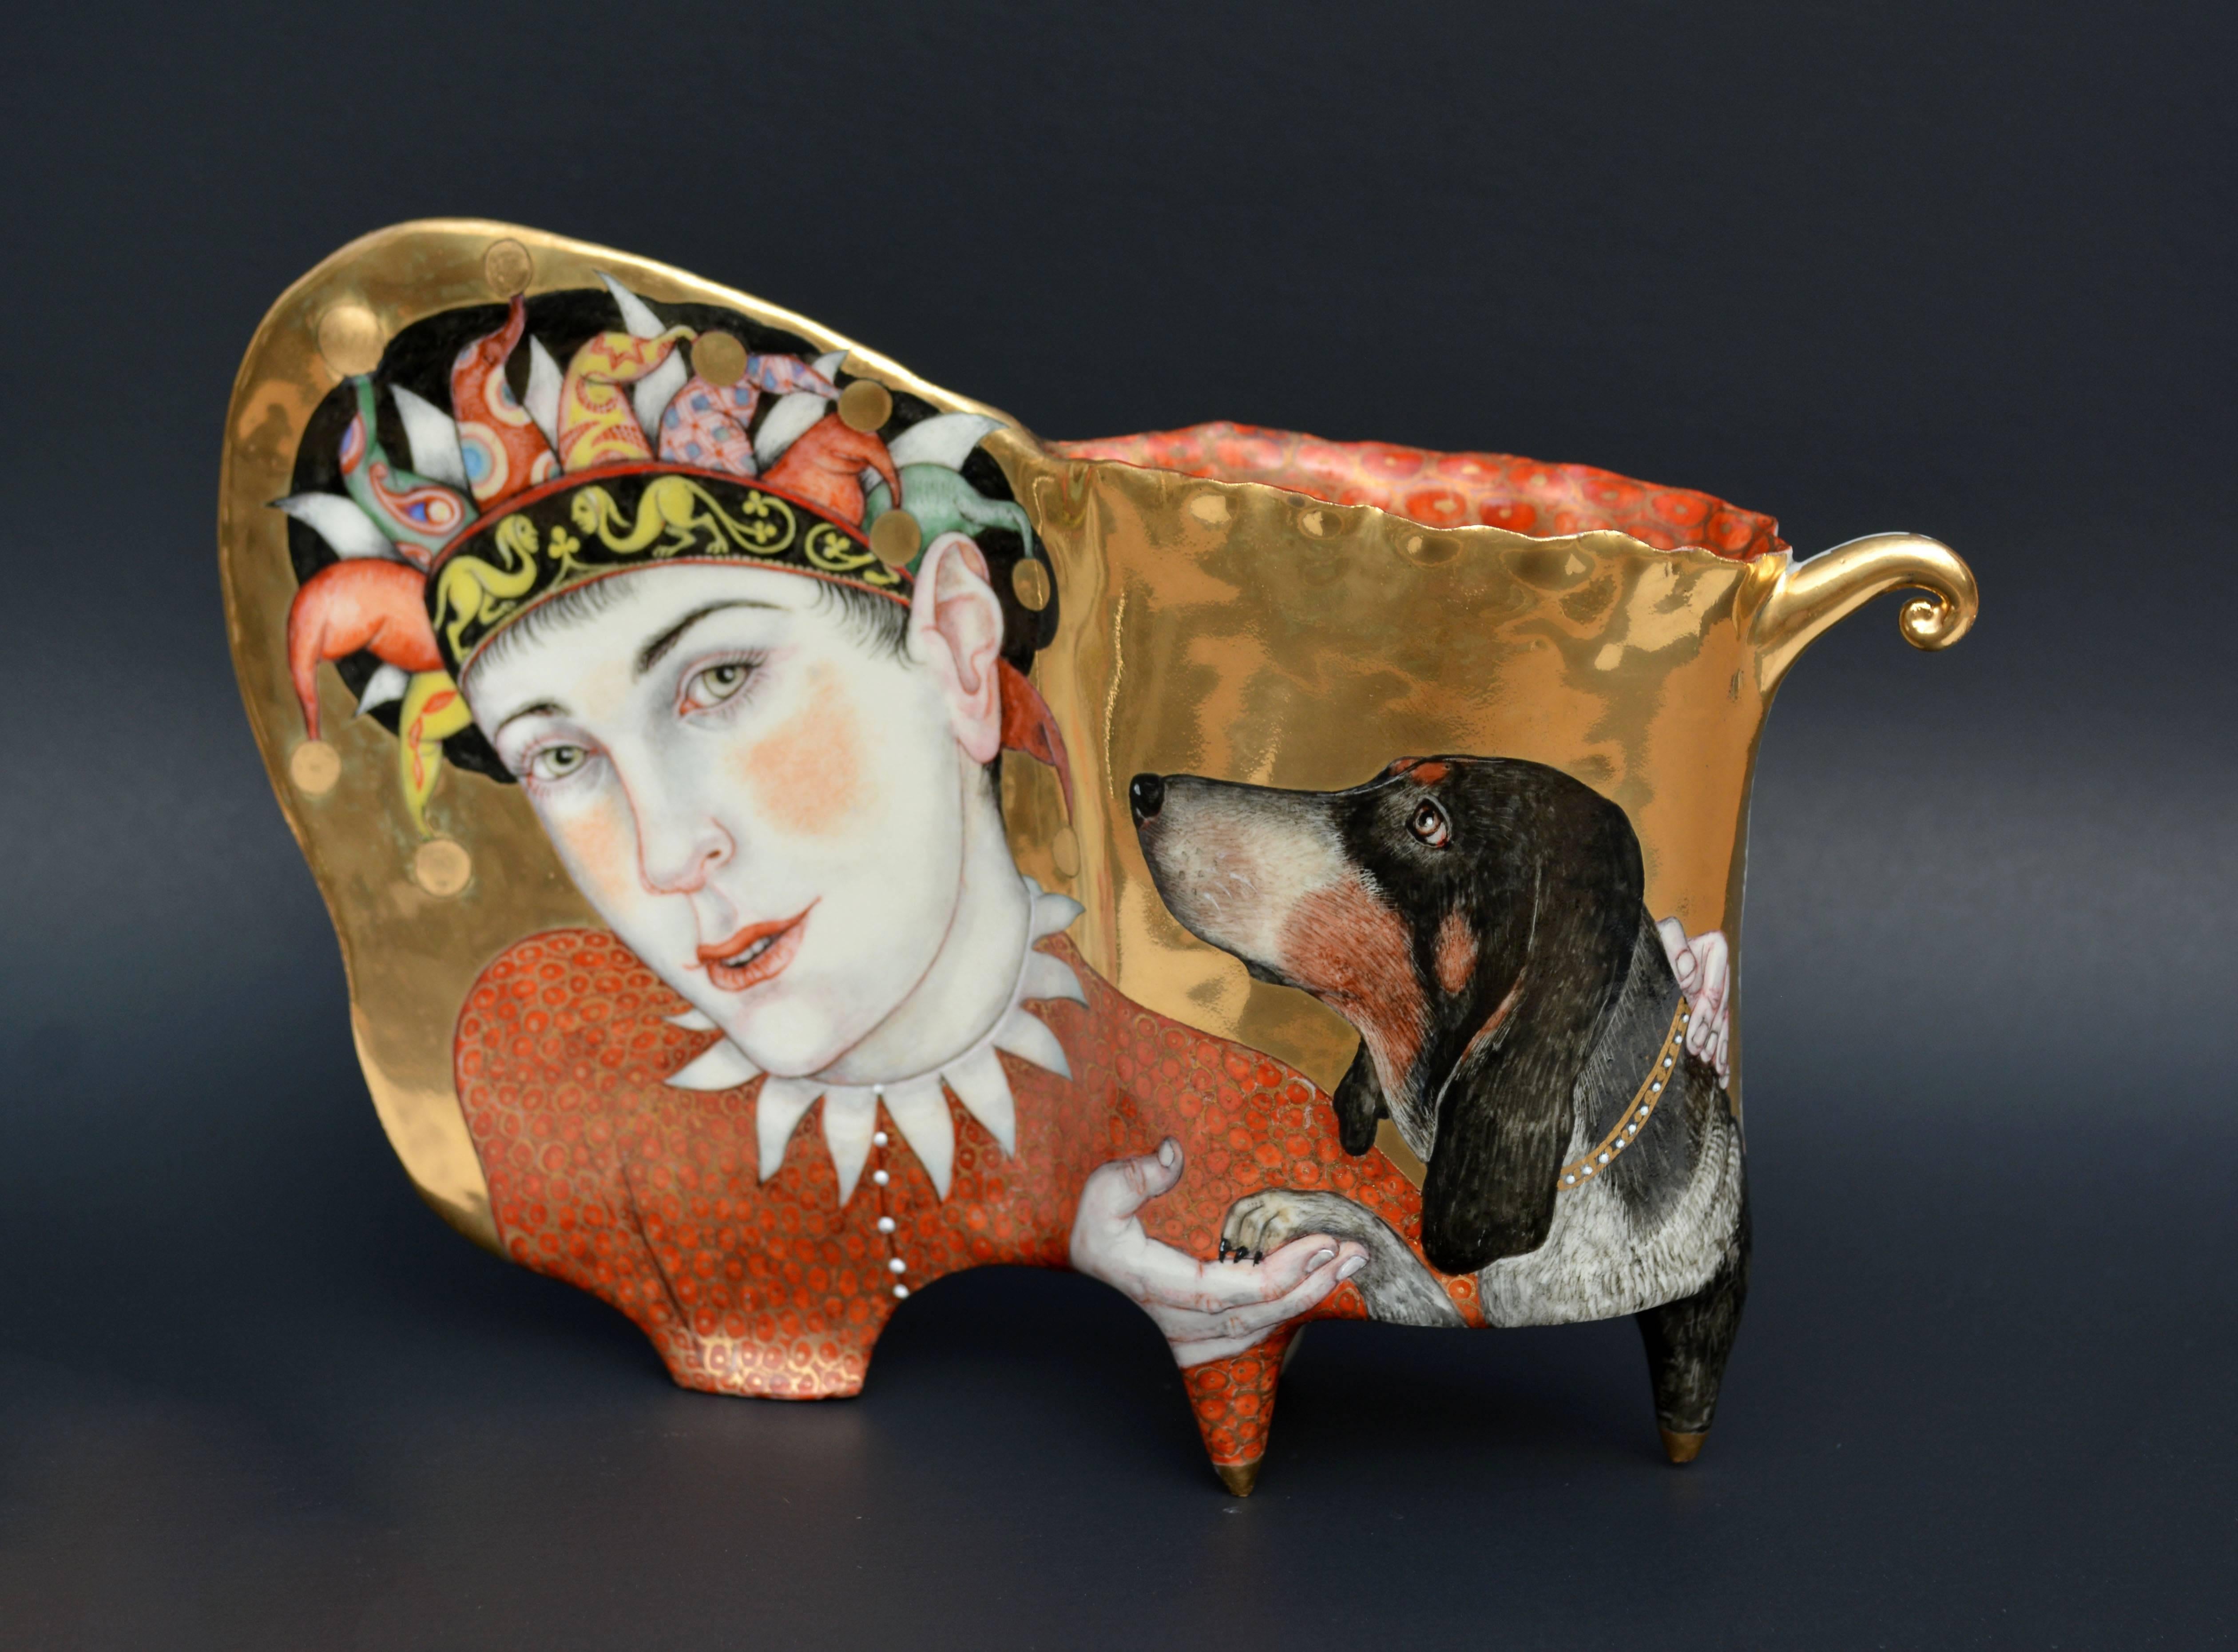 Irina Zaytceva Portrait Painting - "A Clown and His Dogs", Hand Sculpted Porcelain Cup with Painted Illustration